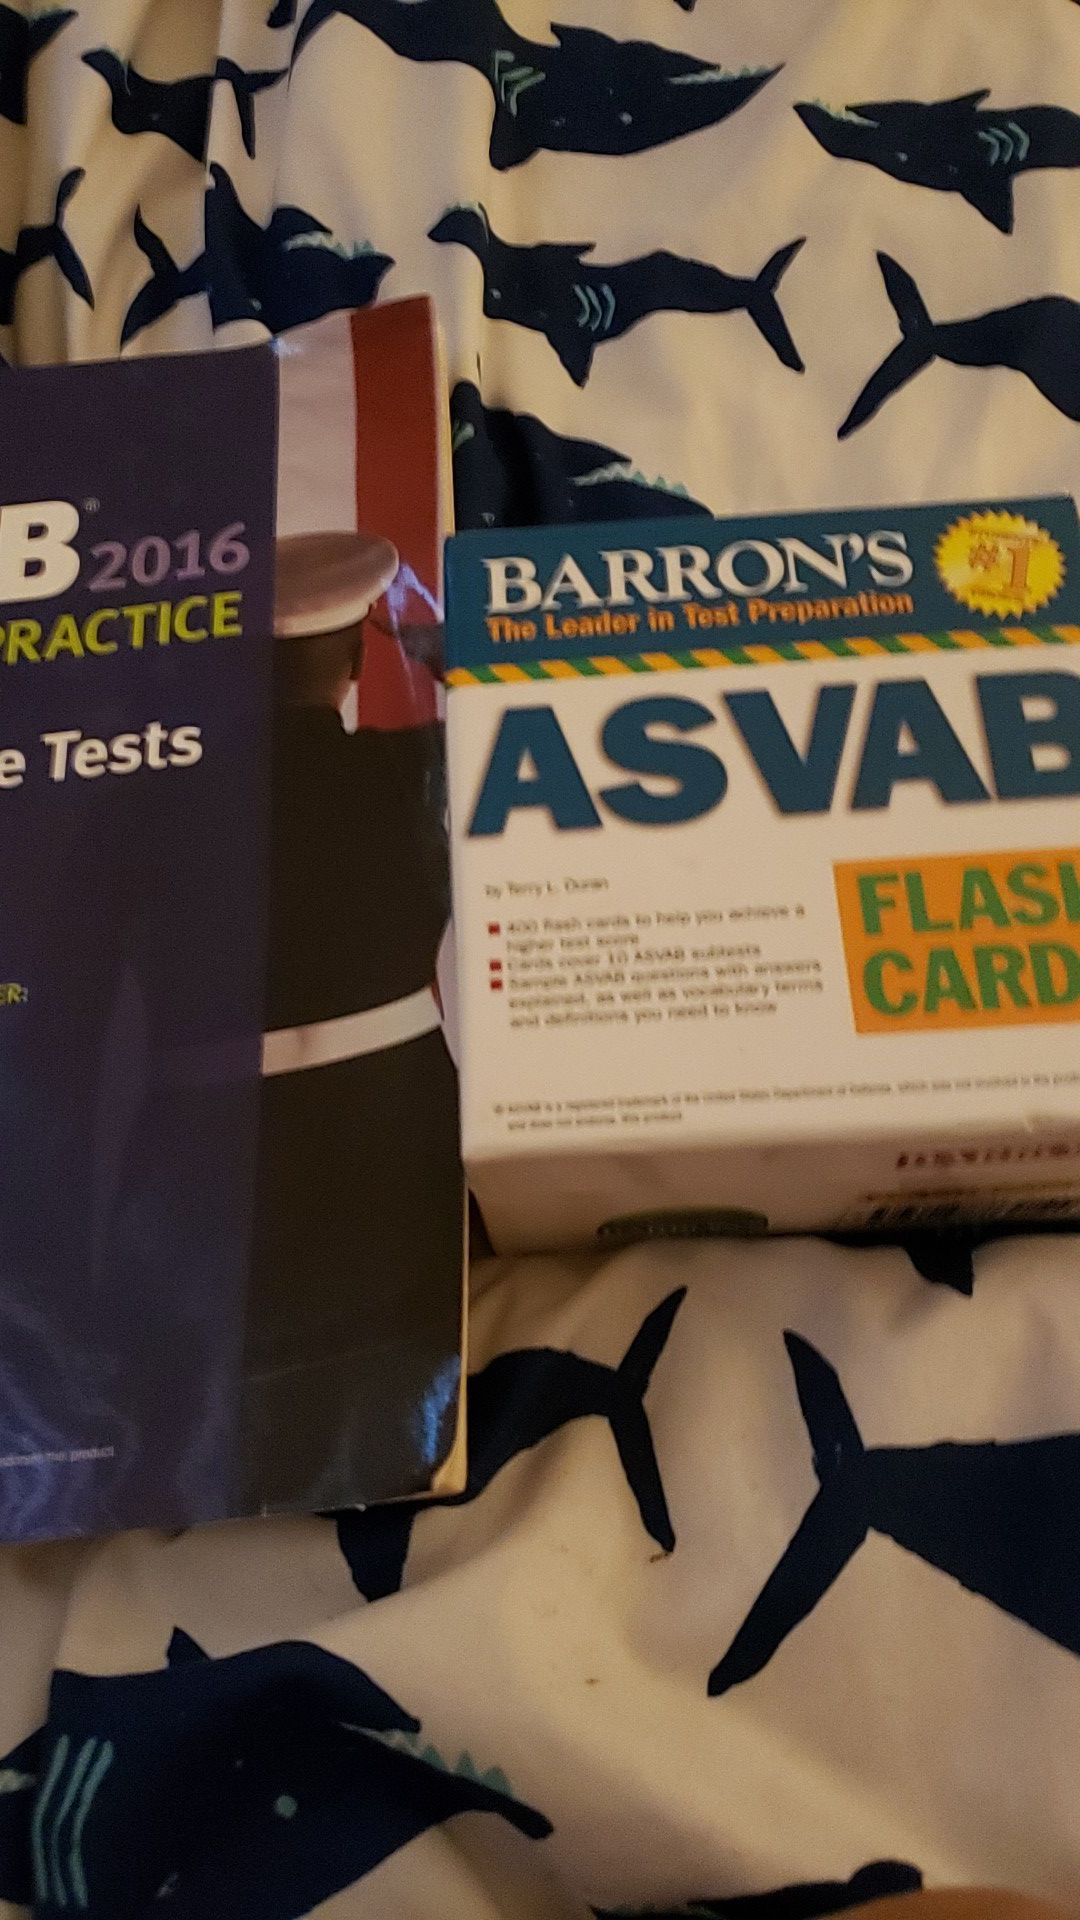 Asvab cards and book